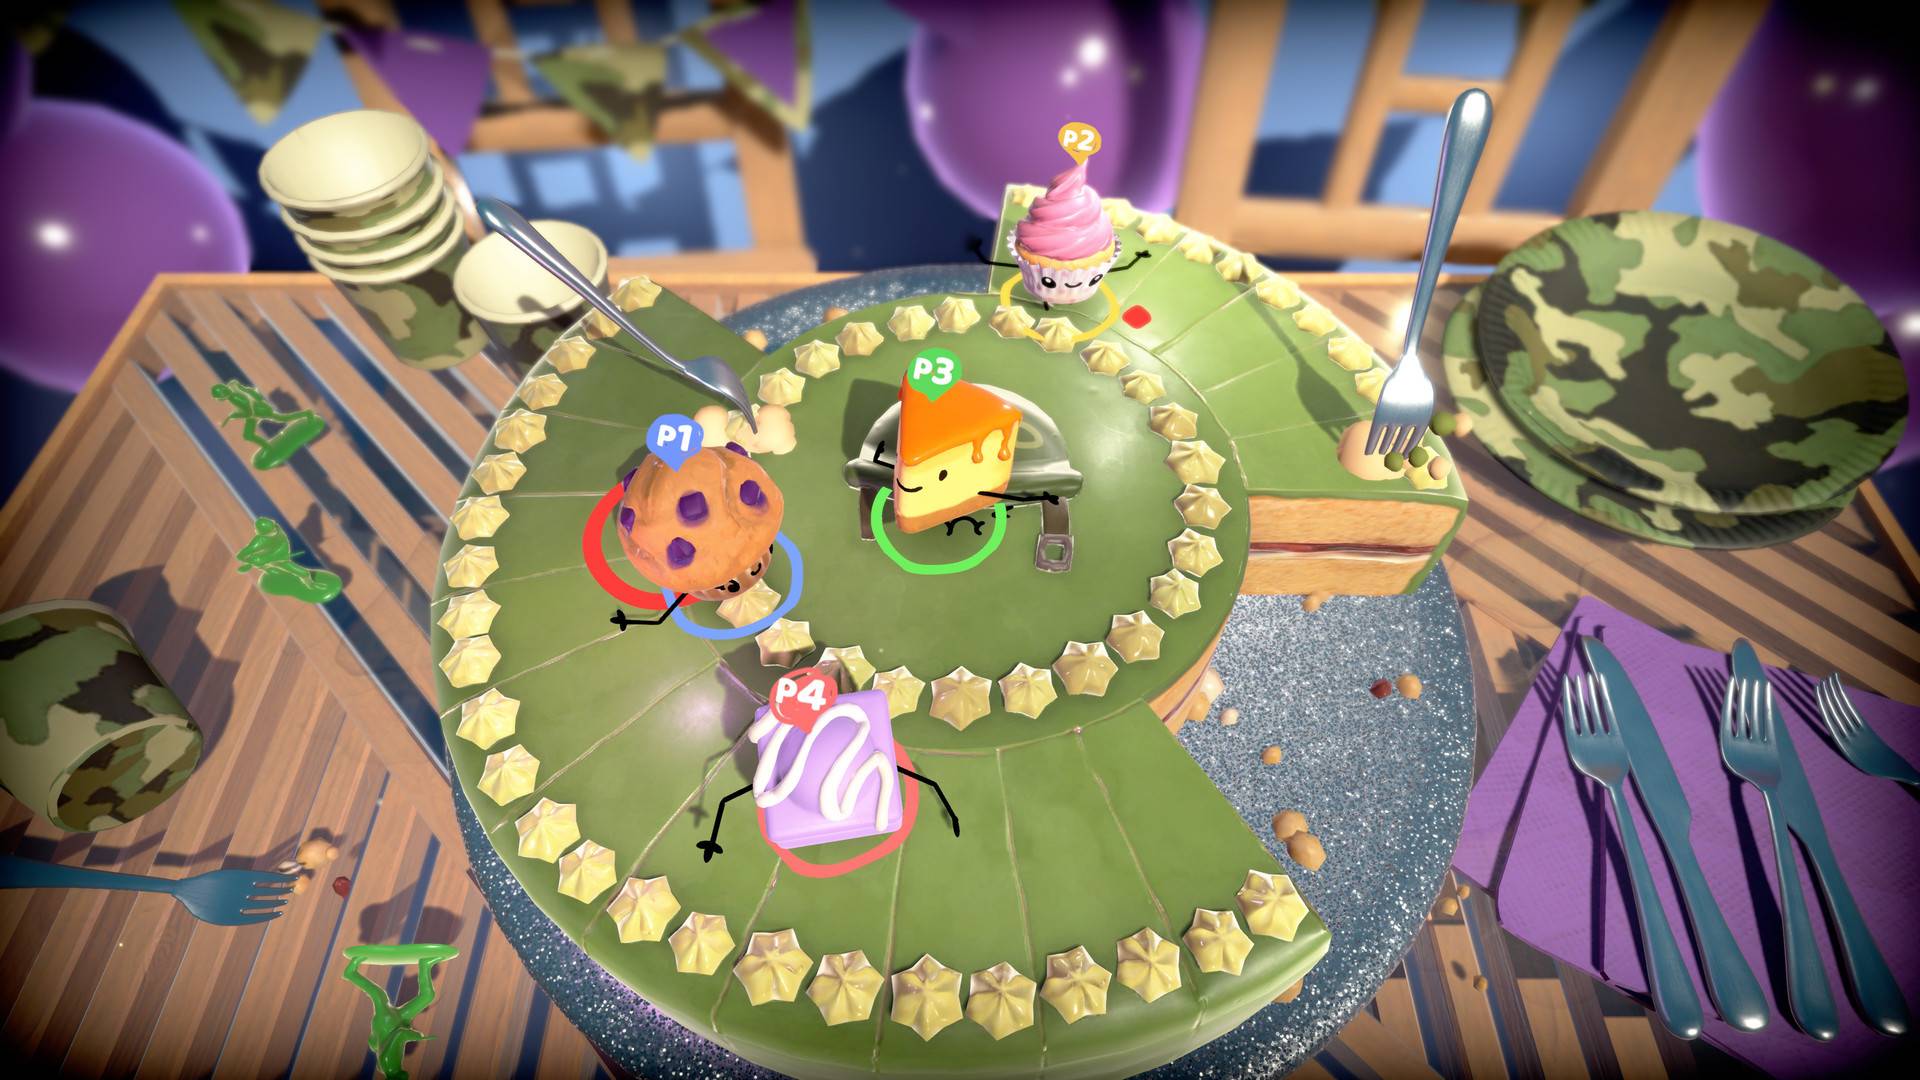 Differetnt characters, all different forms of cake, are battling in a mini-game